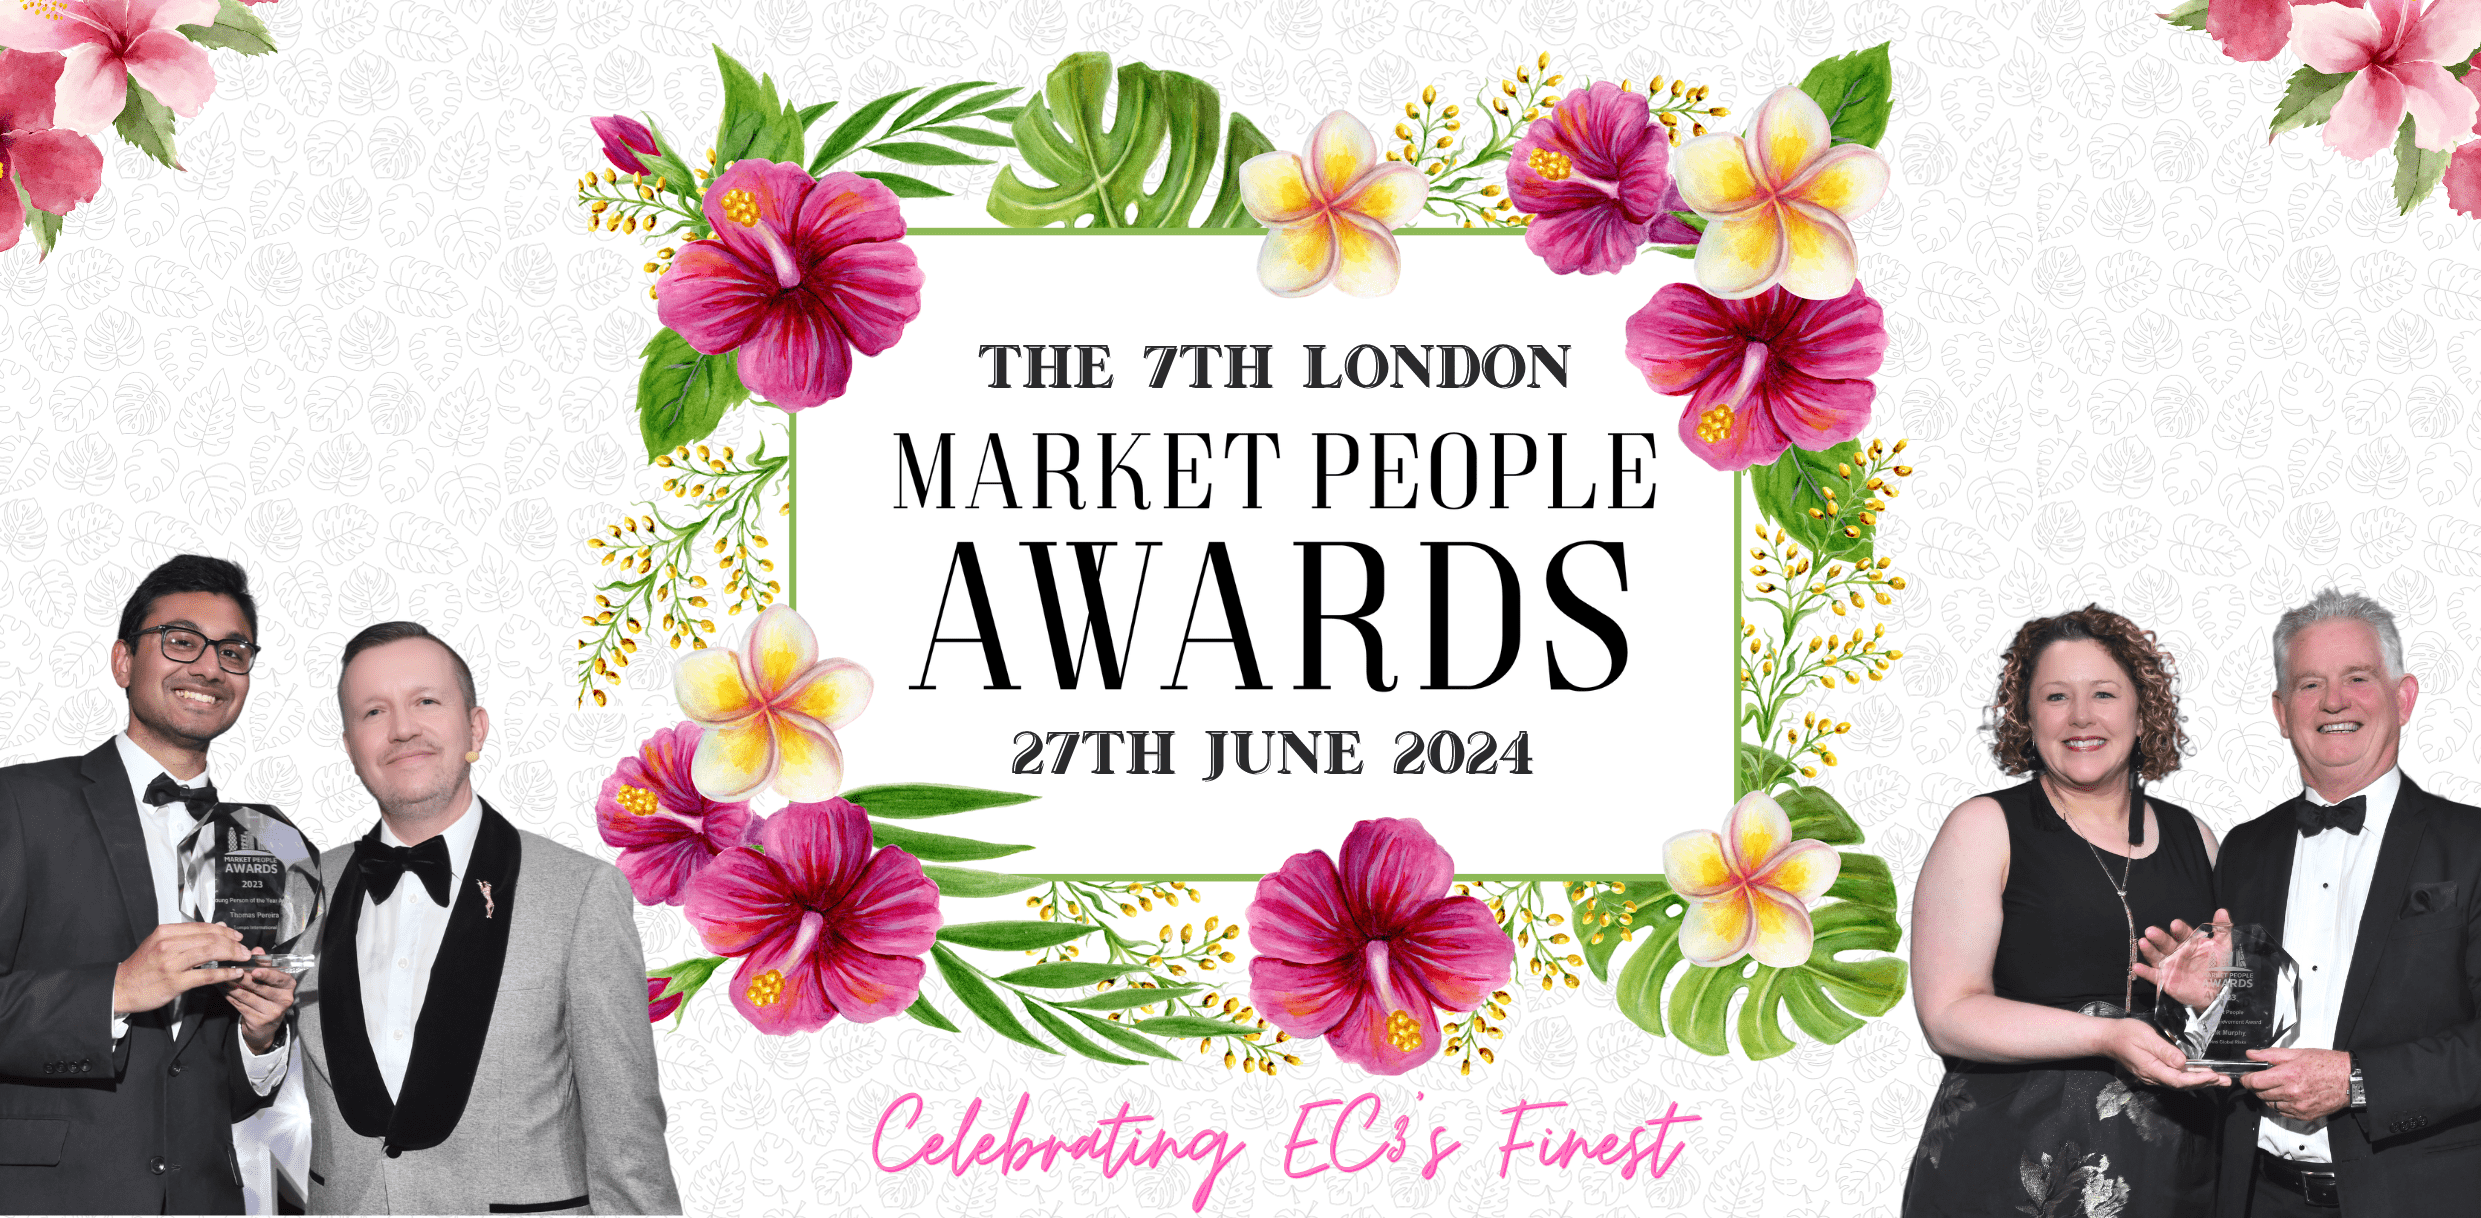 7th Market People Awards - 27th June 2024